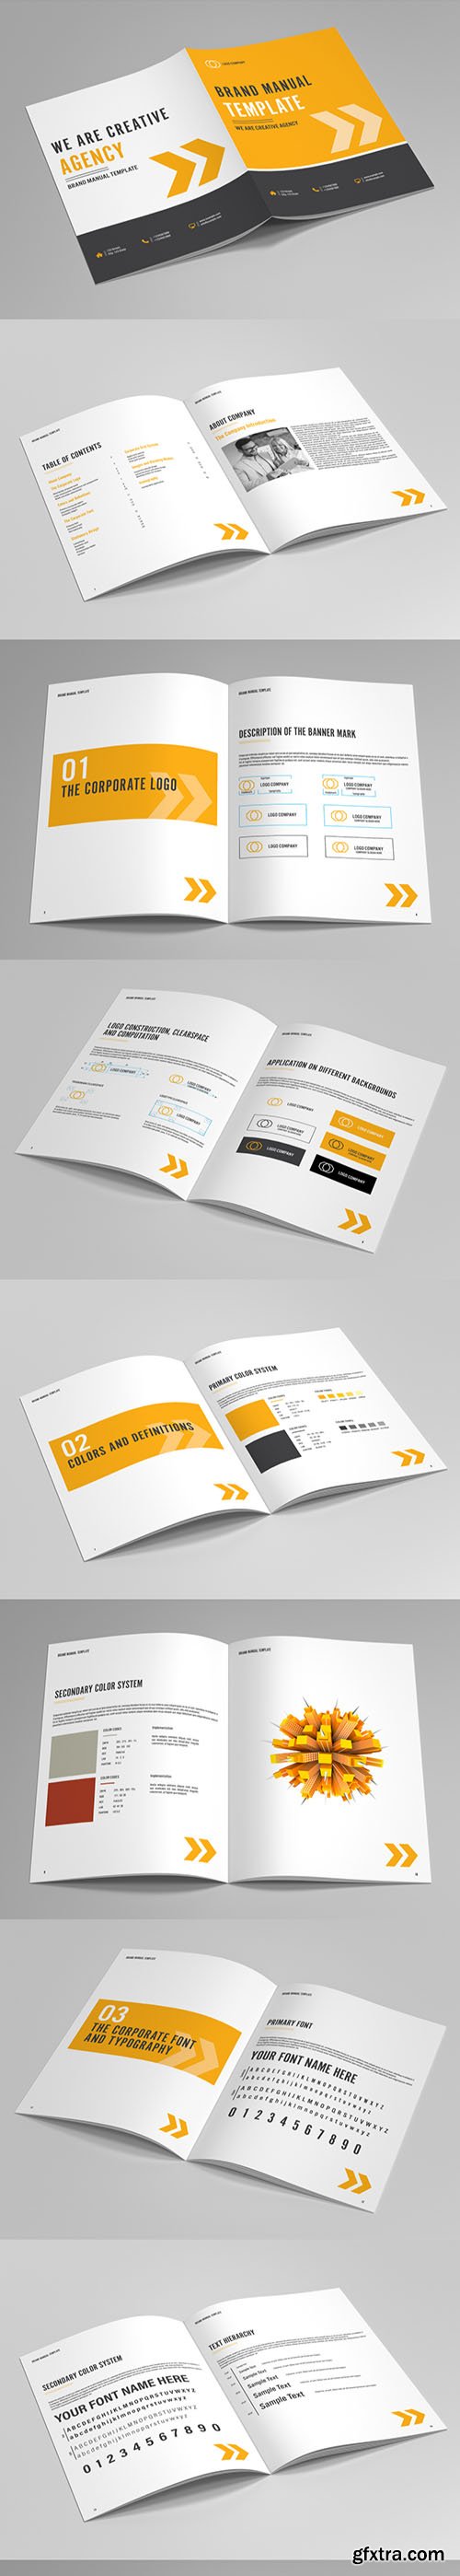 Brand Manual Layout with Orange Accents 1 194043423